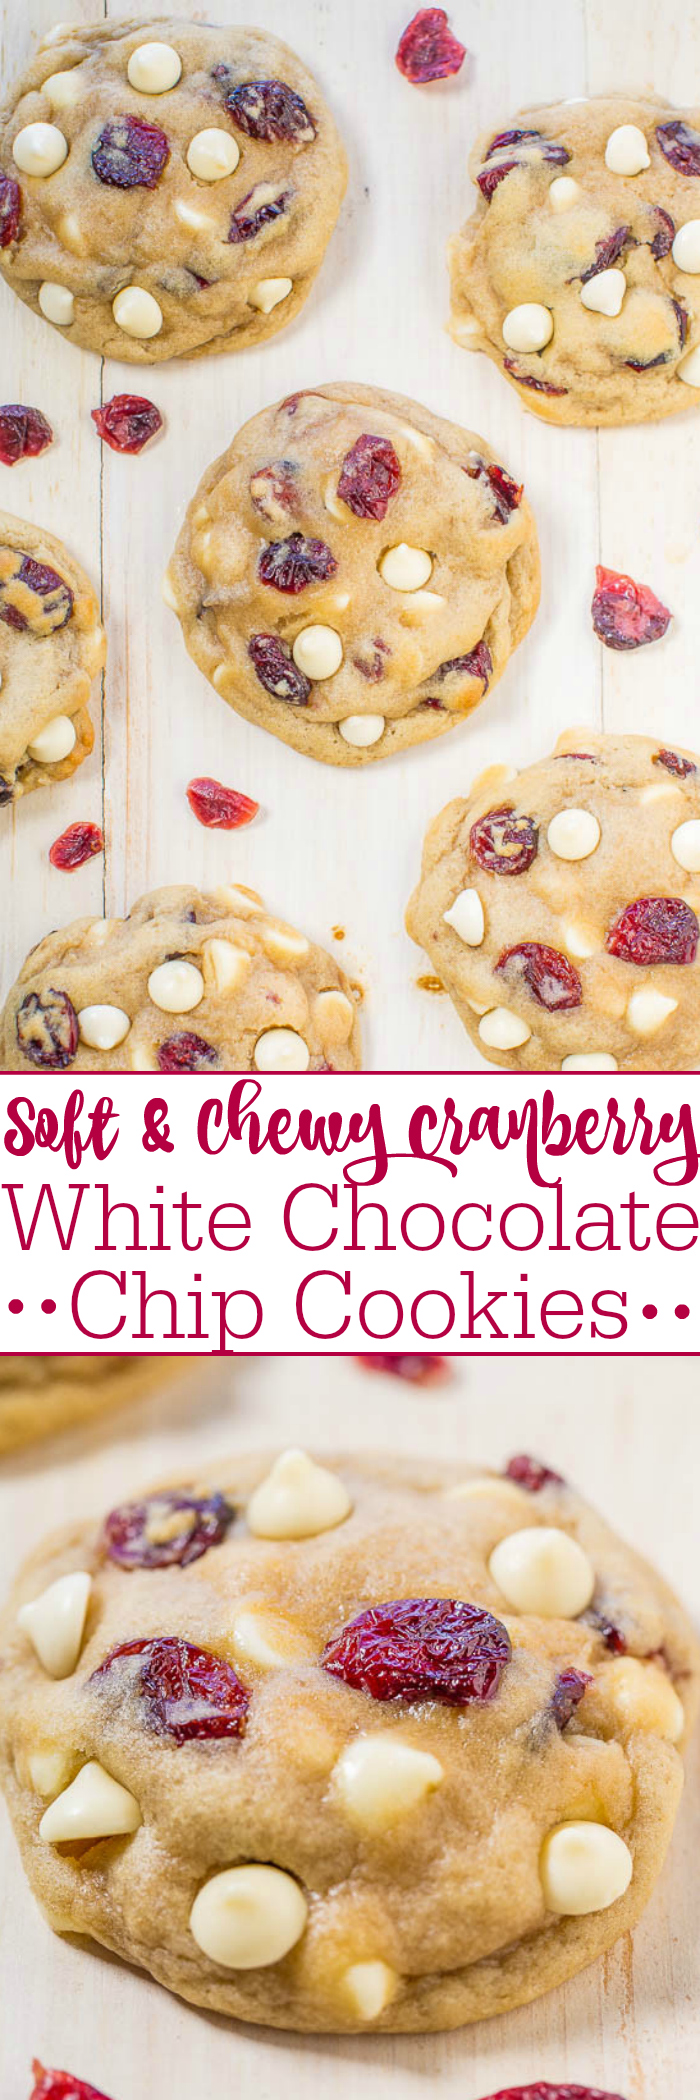 Soft and Chewy Cranberry White Chocolate Chip Cookies - Super soft, buttery, and a holiday baking must-make!! Very popular at cookie exchanges and everyone will want the recipe! So good!!